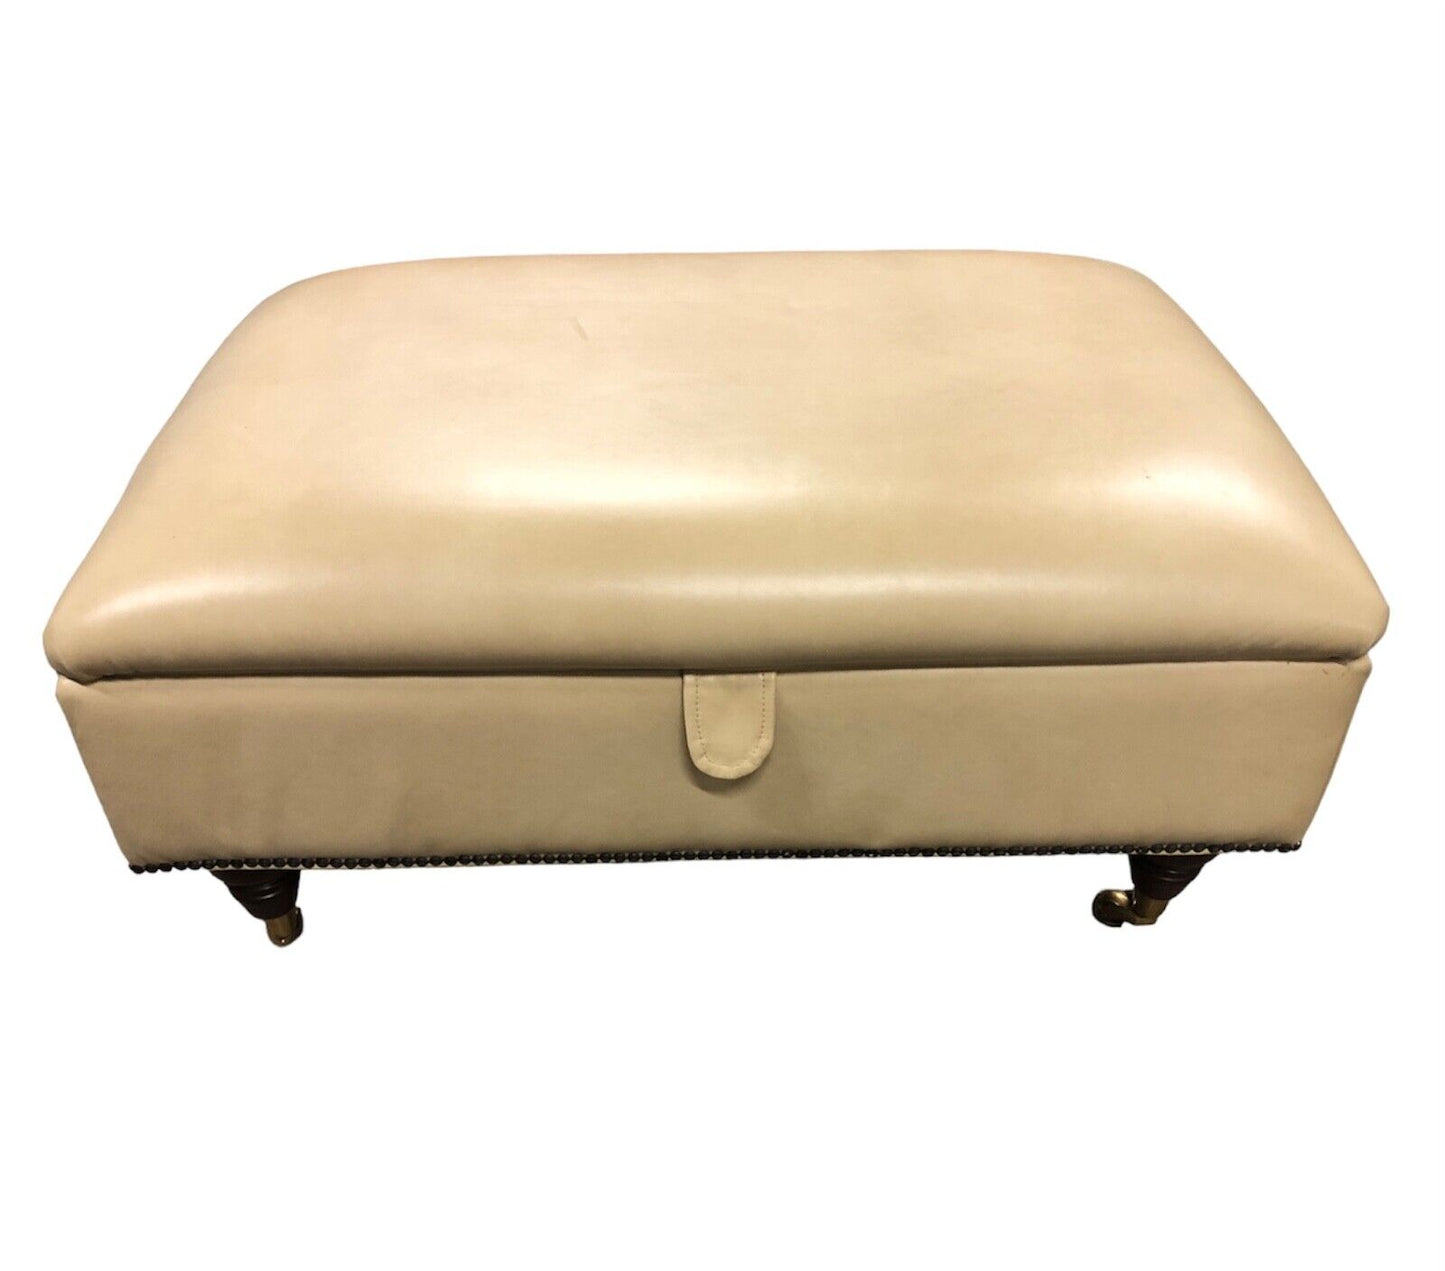 000892....Handsome Large Cream Leather Stool